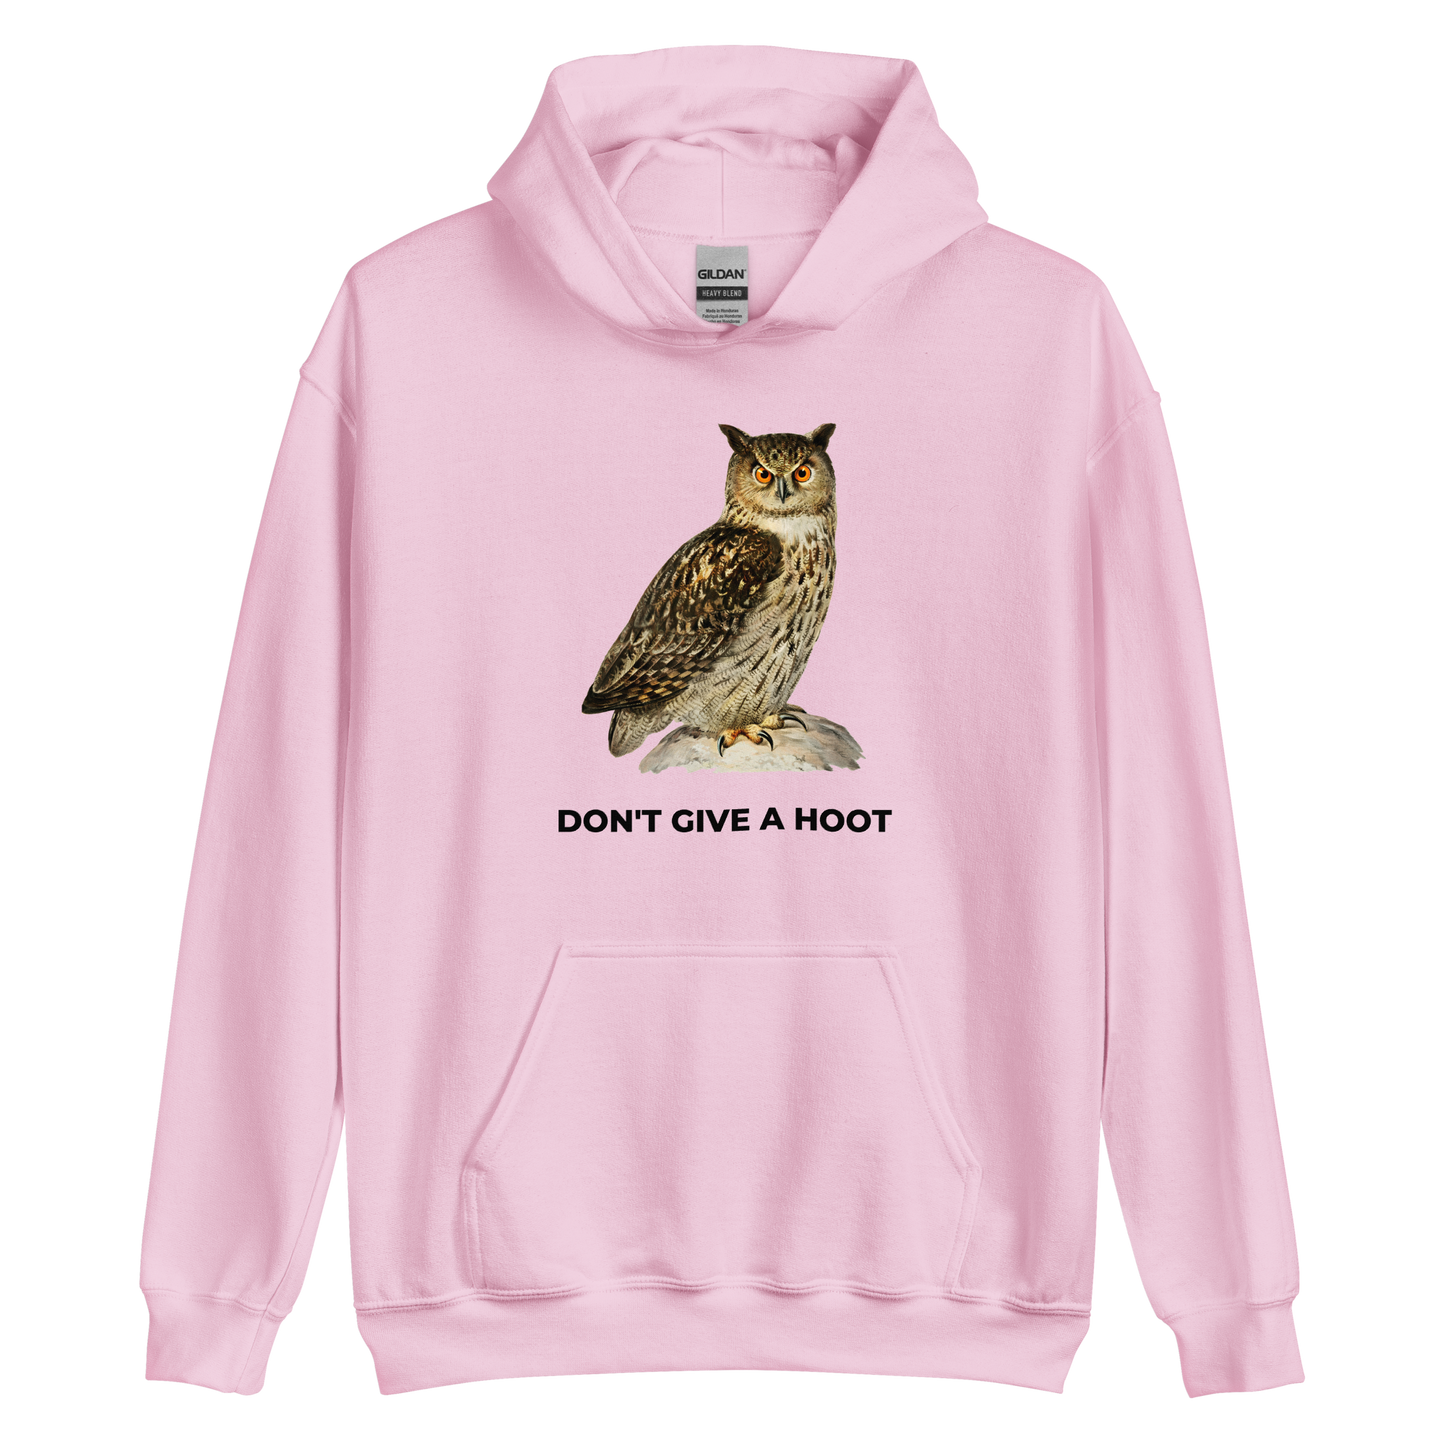 Light Pink Owl Hoodie featuring a captivating Don't Give A Hoot graphic on the chest - Funny Graphic Owl Hoodies - Boozy Fox